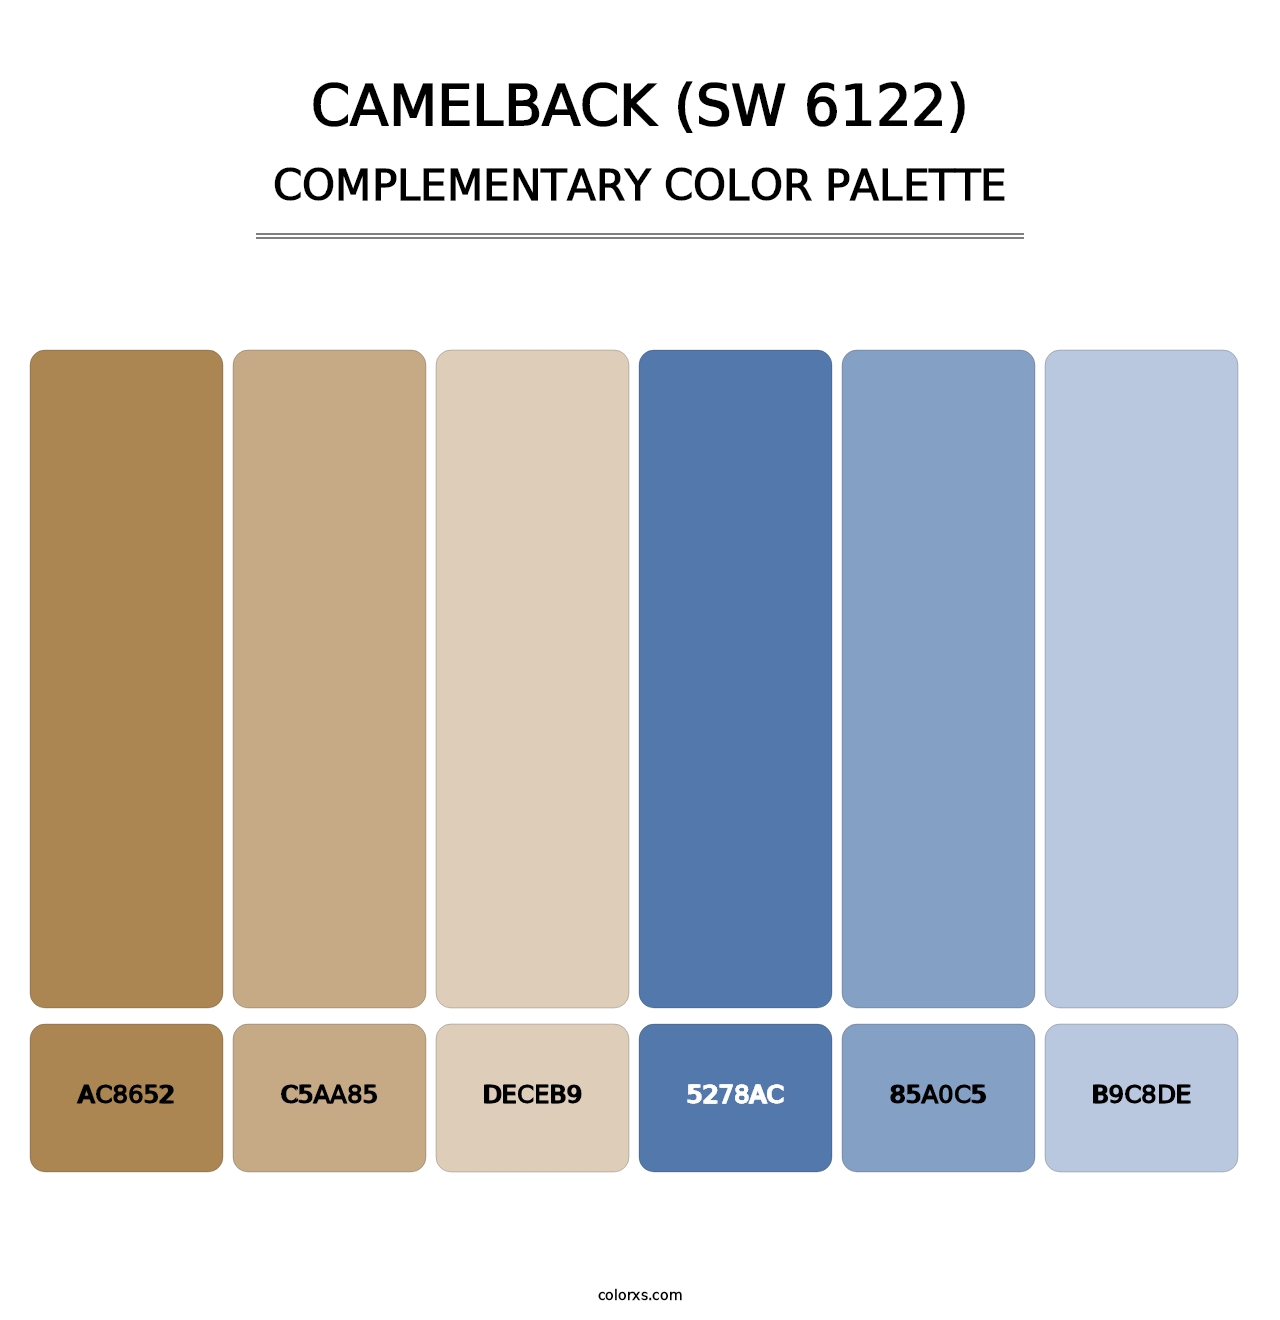 Camelback (SW 6122) - Complementary Color Palette